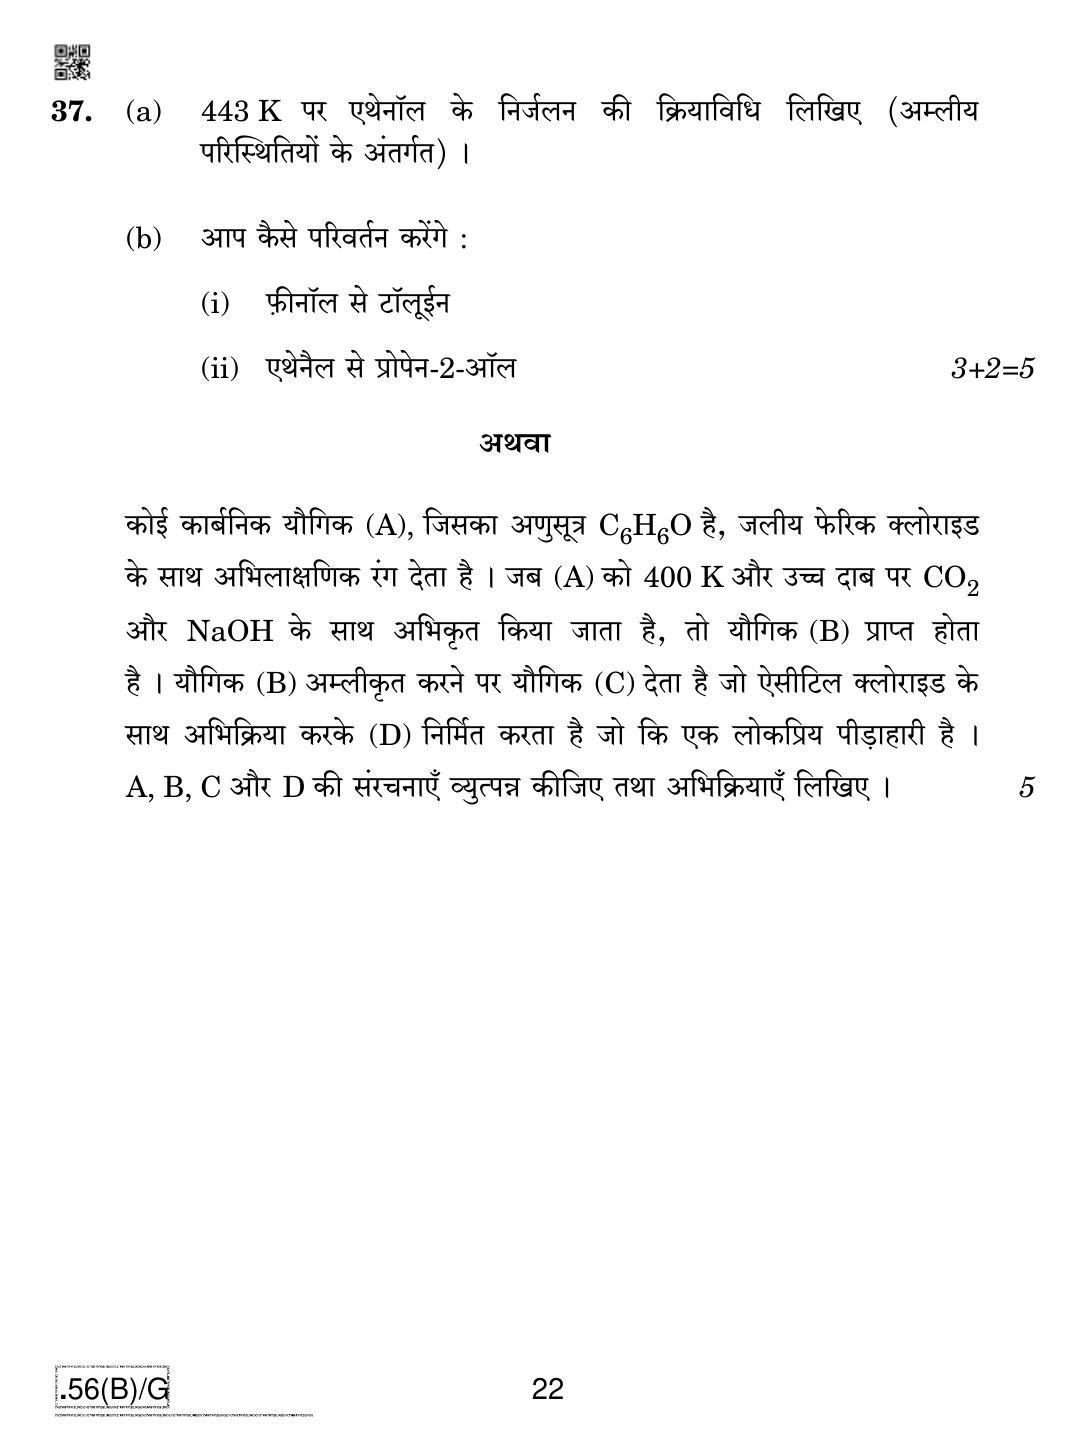 CBSE Class 12 56(B)-C - Chemistry For Blind Candidates 2020 Compartment Question Paper - Page 22